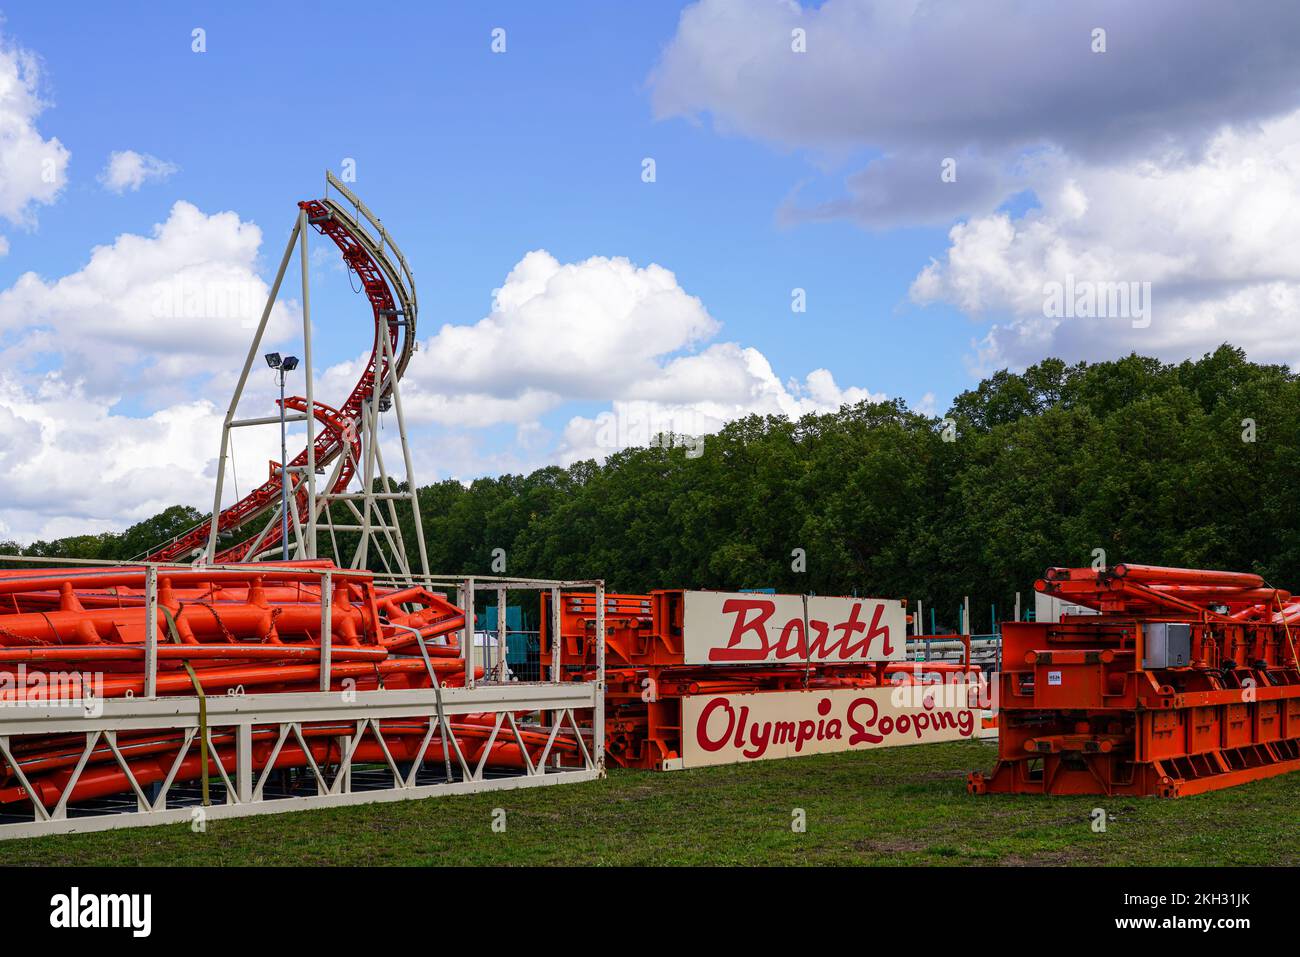 As every year, on the fairground Theresienwiese the Rides and Fairground Businesses for the world's largest Folk Festival, the Oktoberfest are set up. Stock Photo